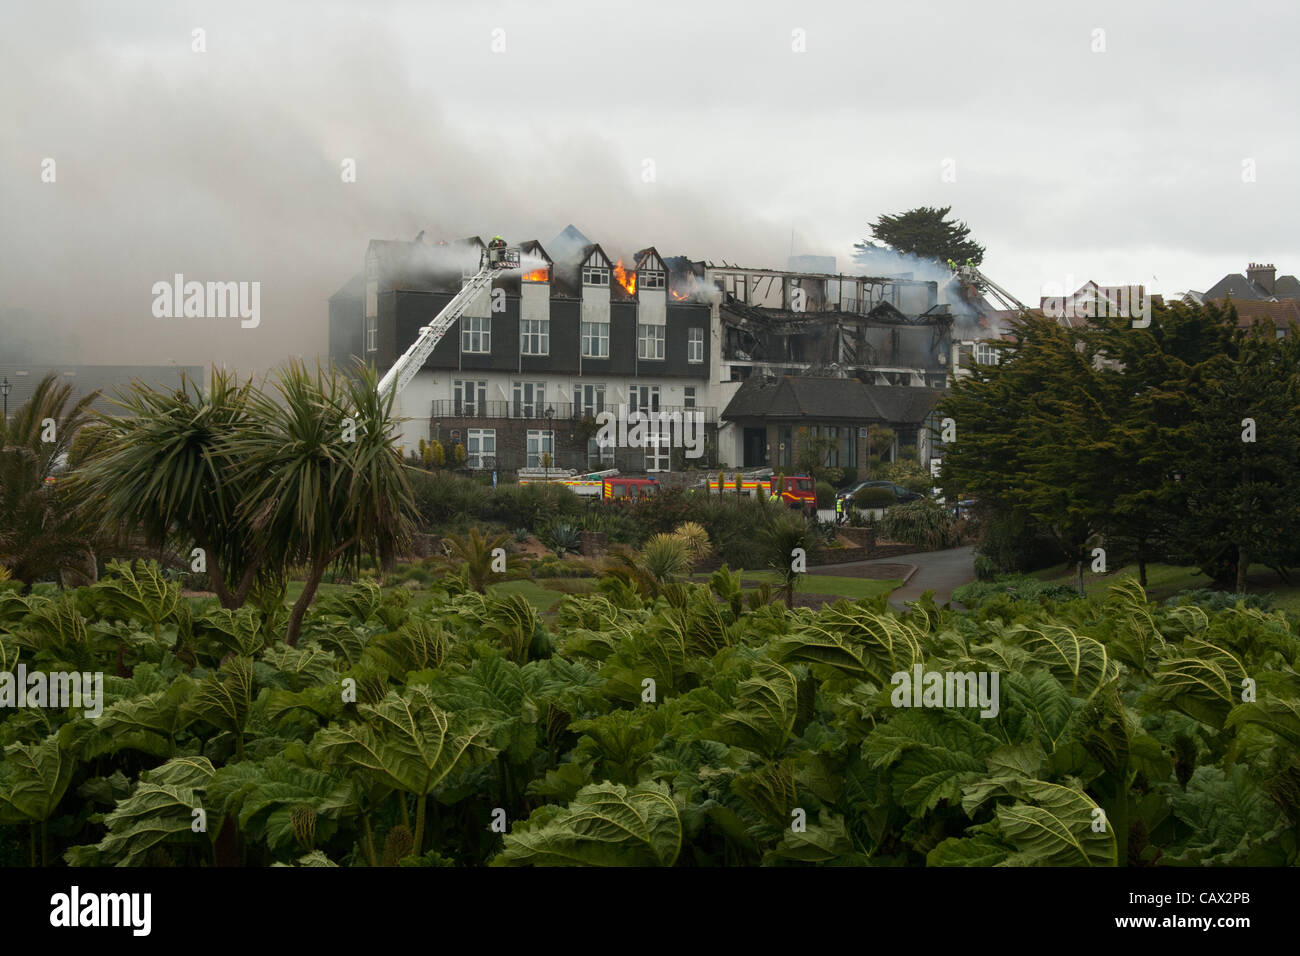 Fire at Falmouth's Beach hotel destroys much of the building and its content on April 30th 2012. Stock Photo